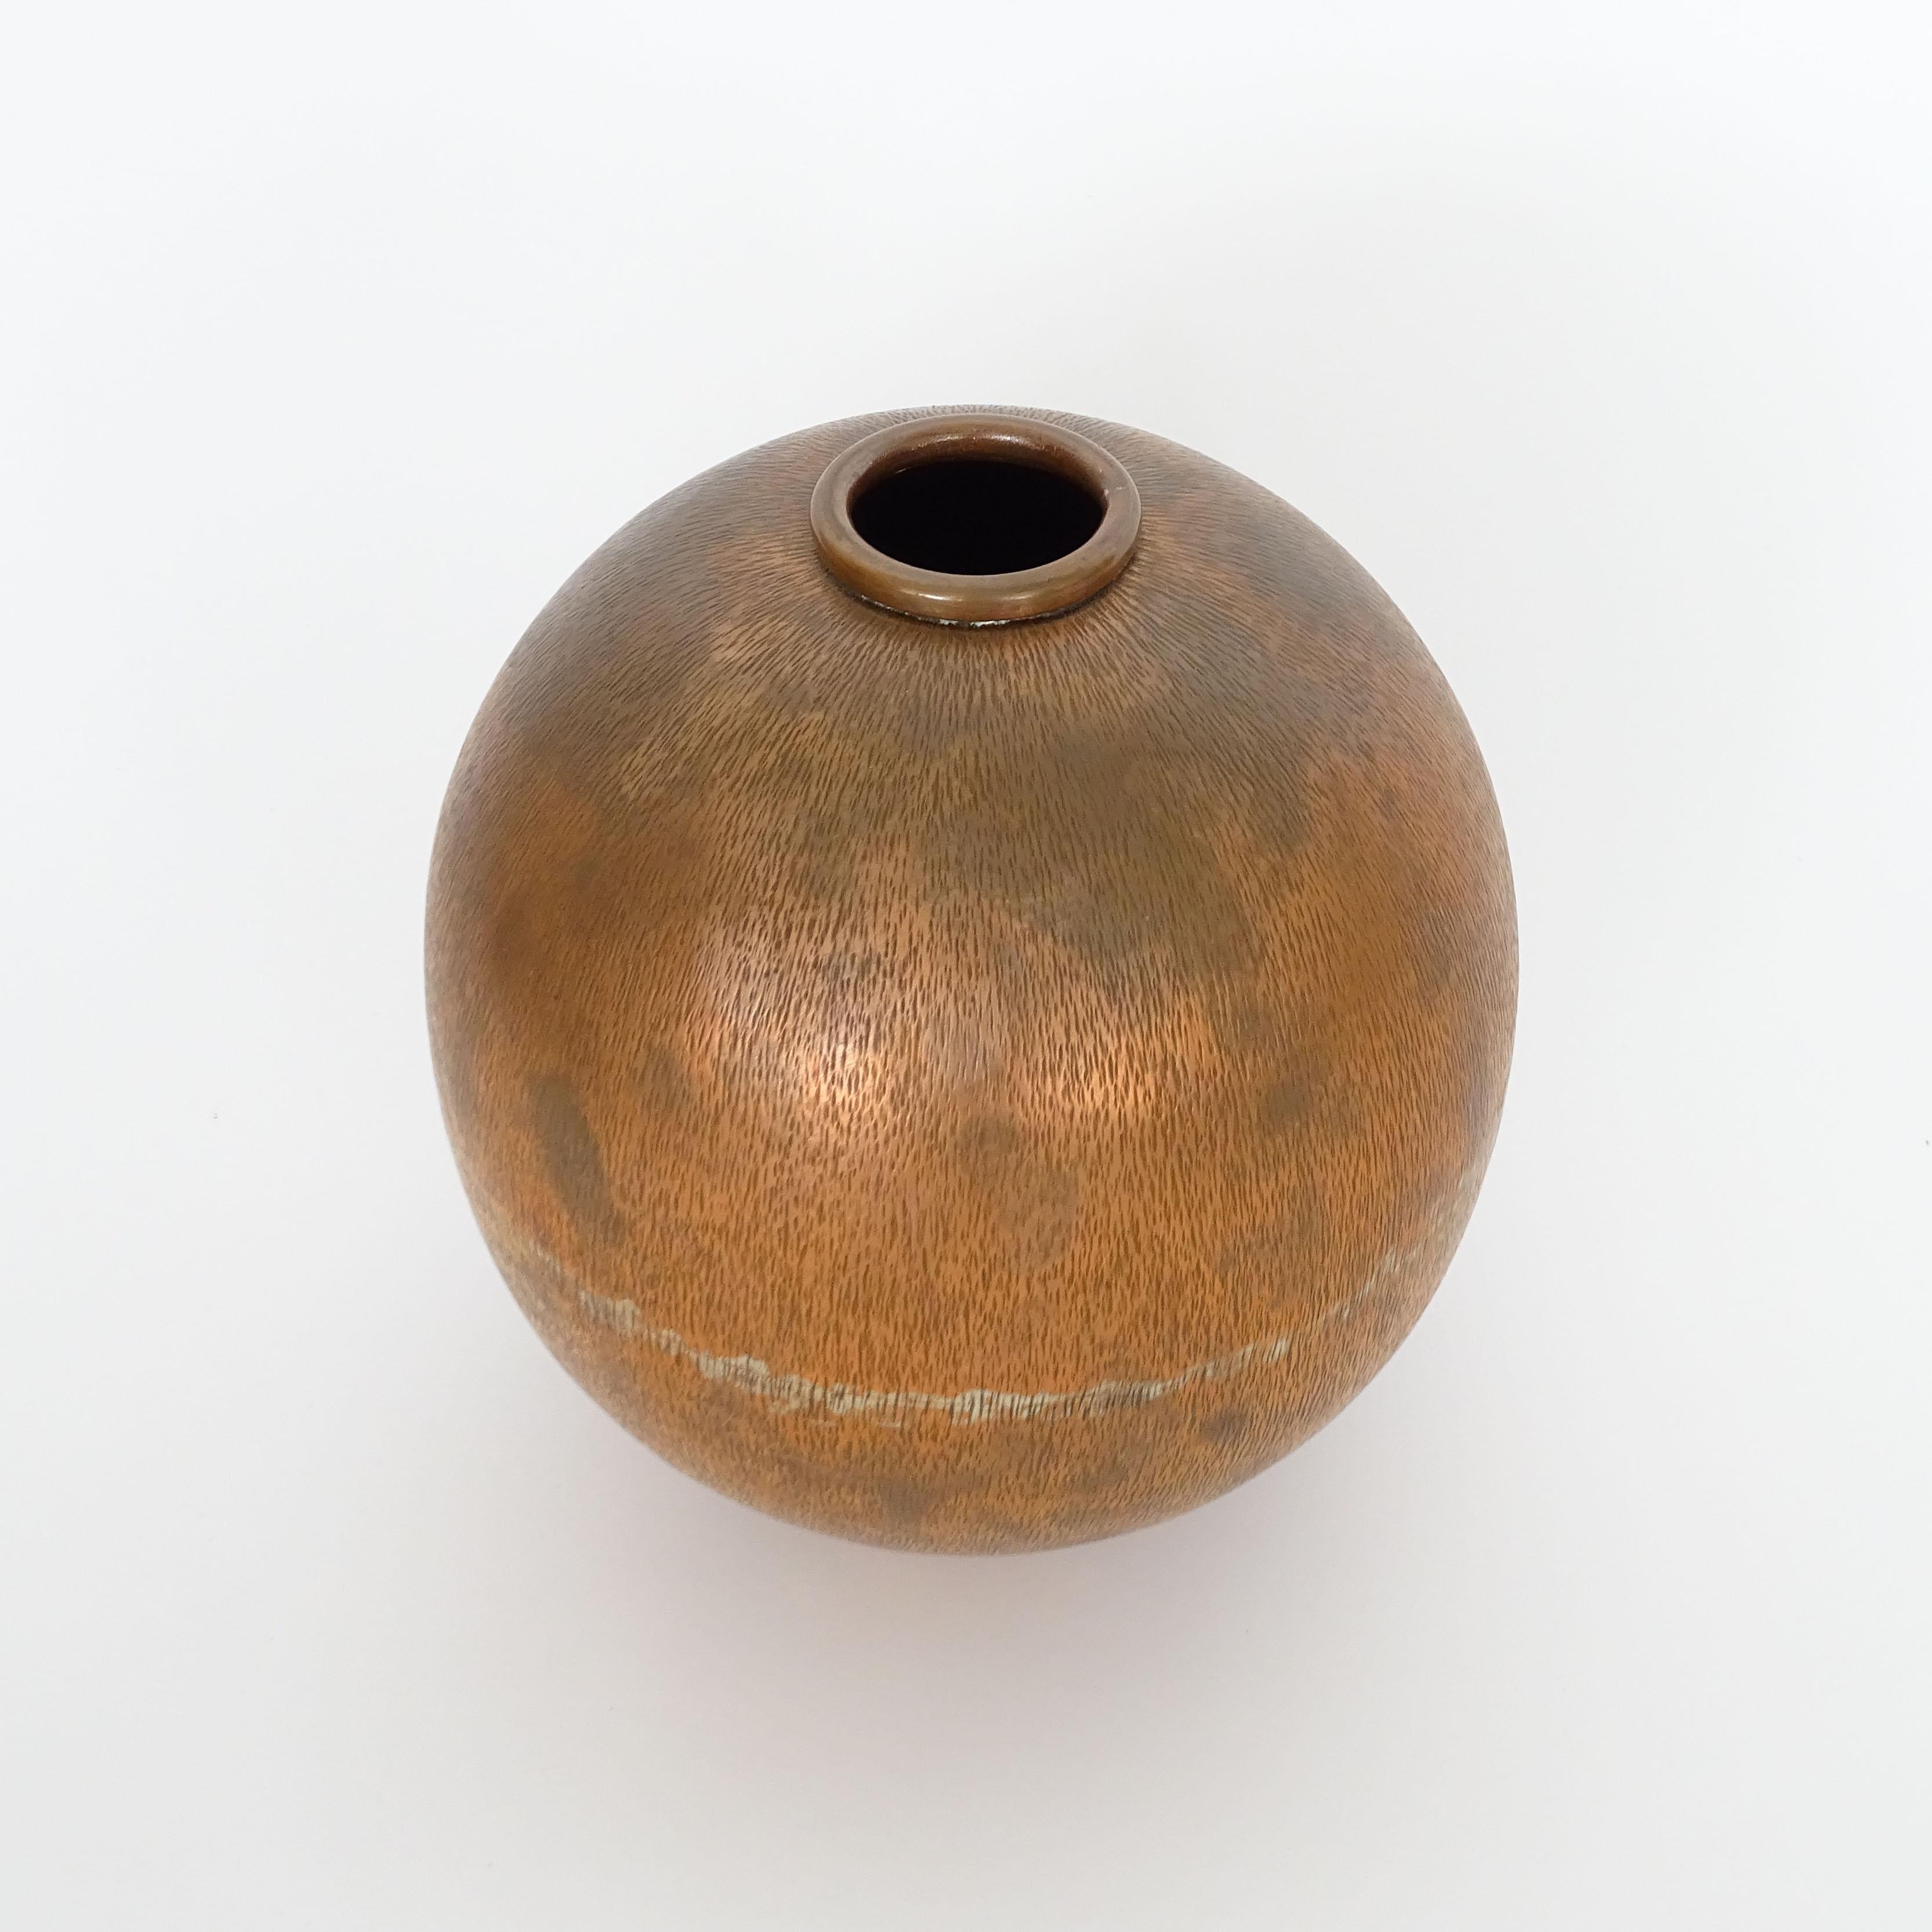 Beautiful copper vase designed by Gio Ponti and executed by Nino Ferrari for Casa & Giardino, Italy, 1930s.